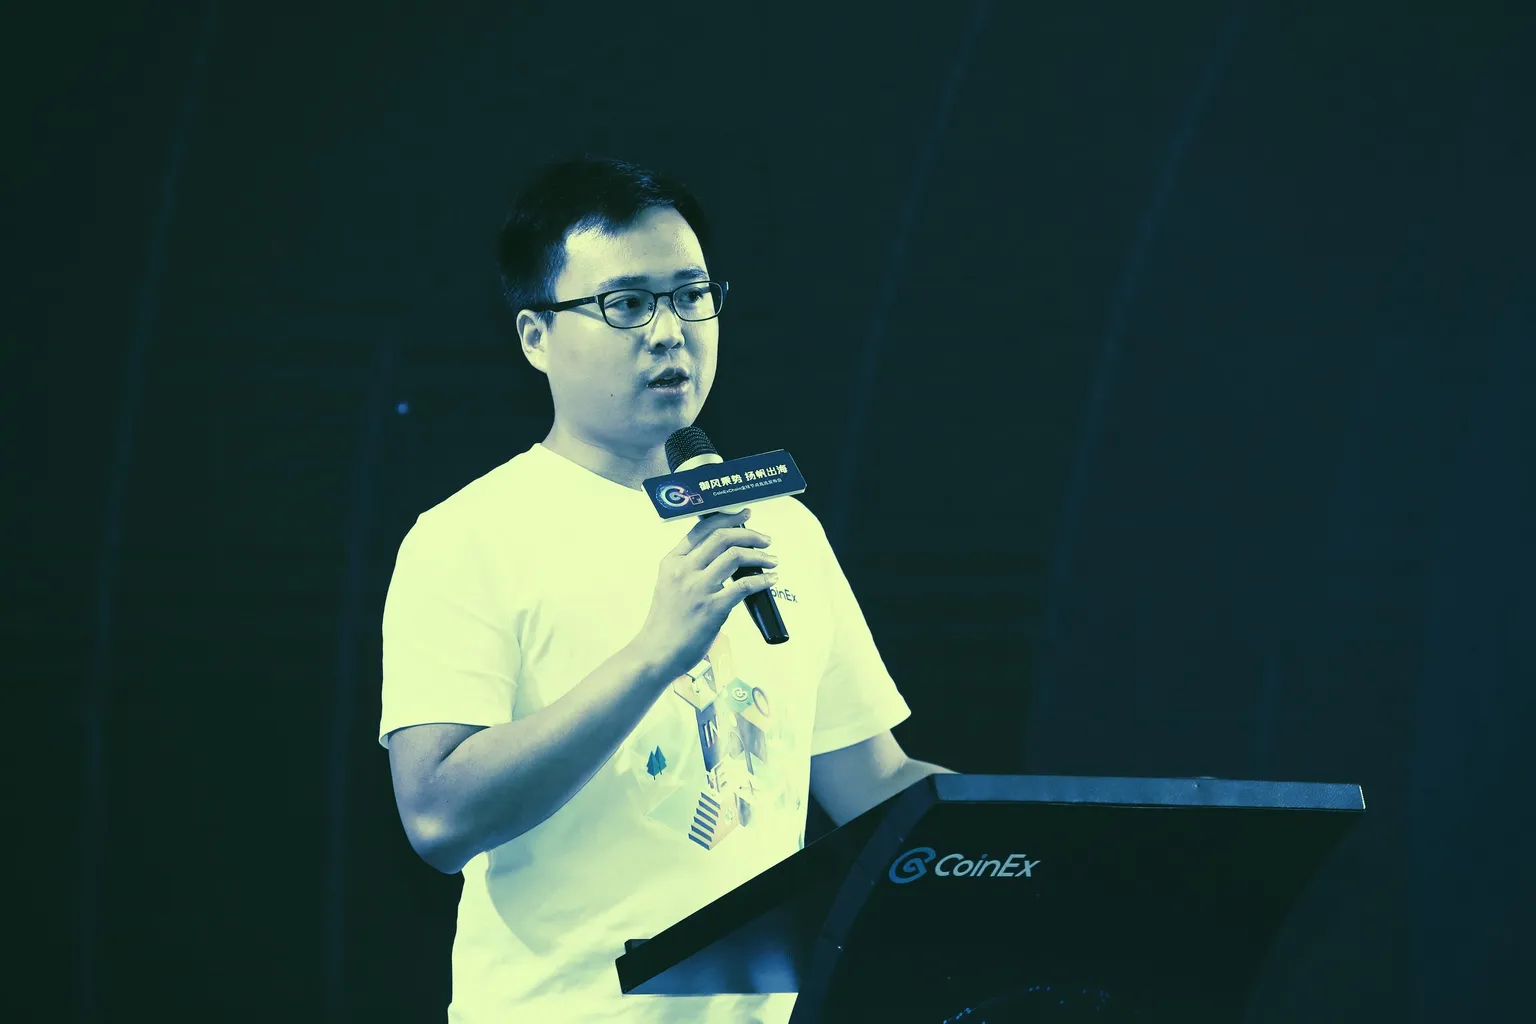 Haibo Yang is trying to renovate the CoinEx exchange.